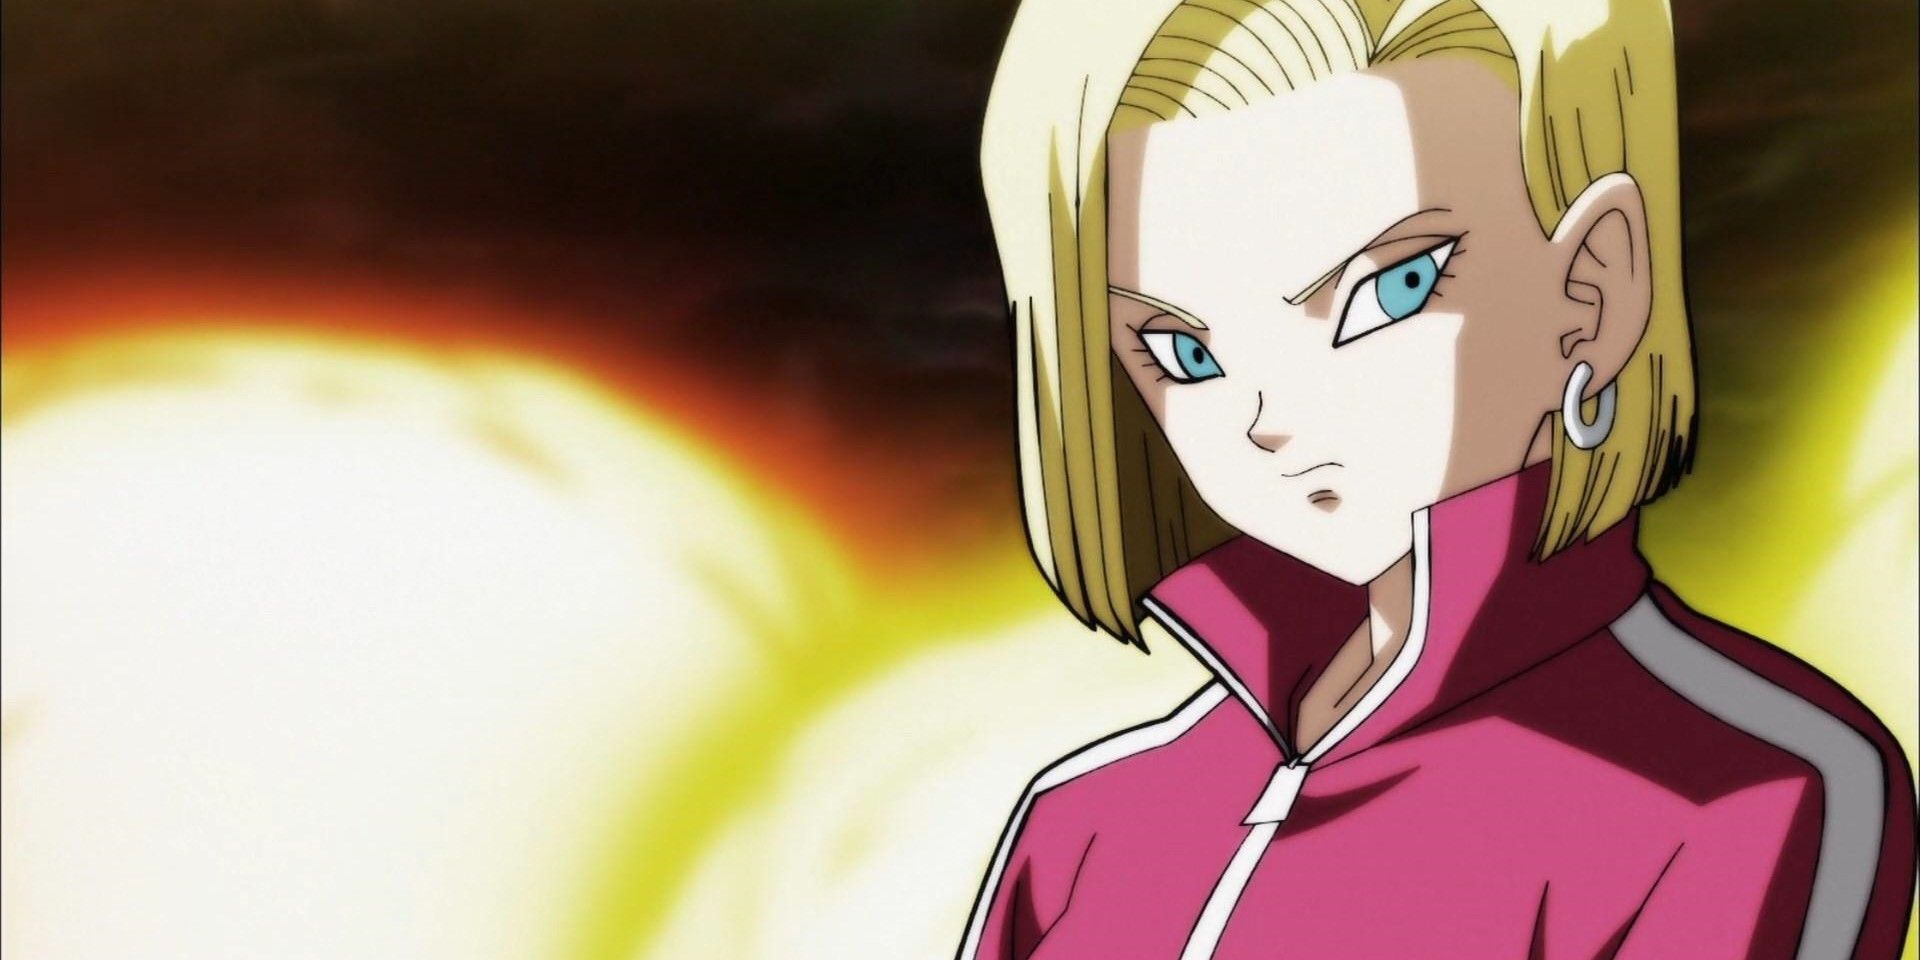 Android 18 prepares for battle in Dragon Ball Super